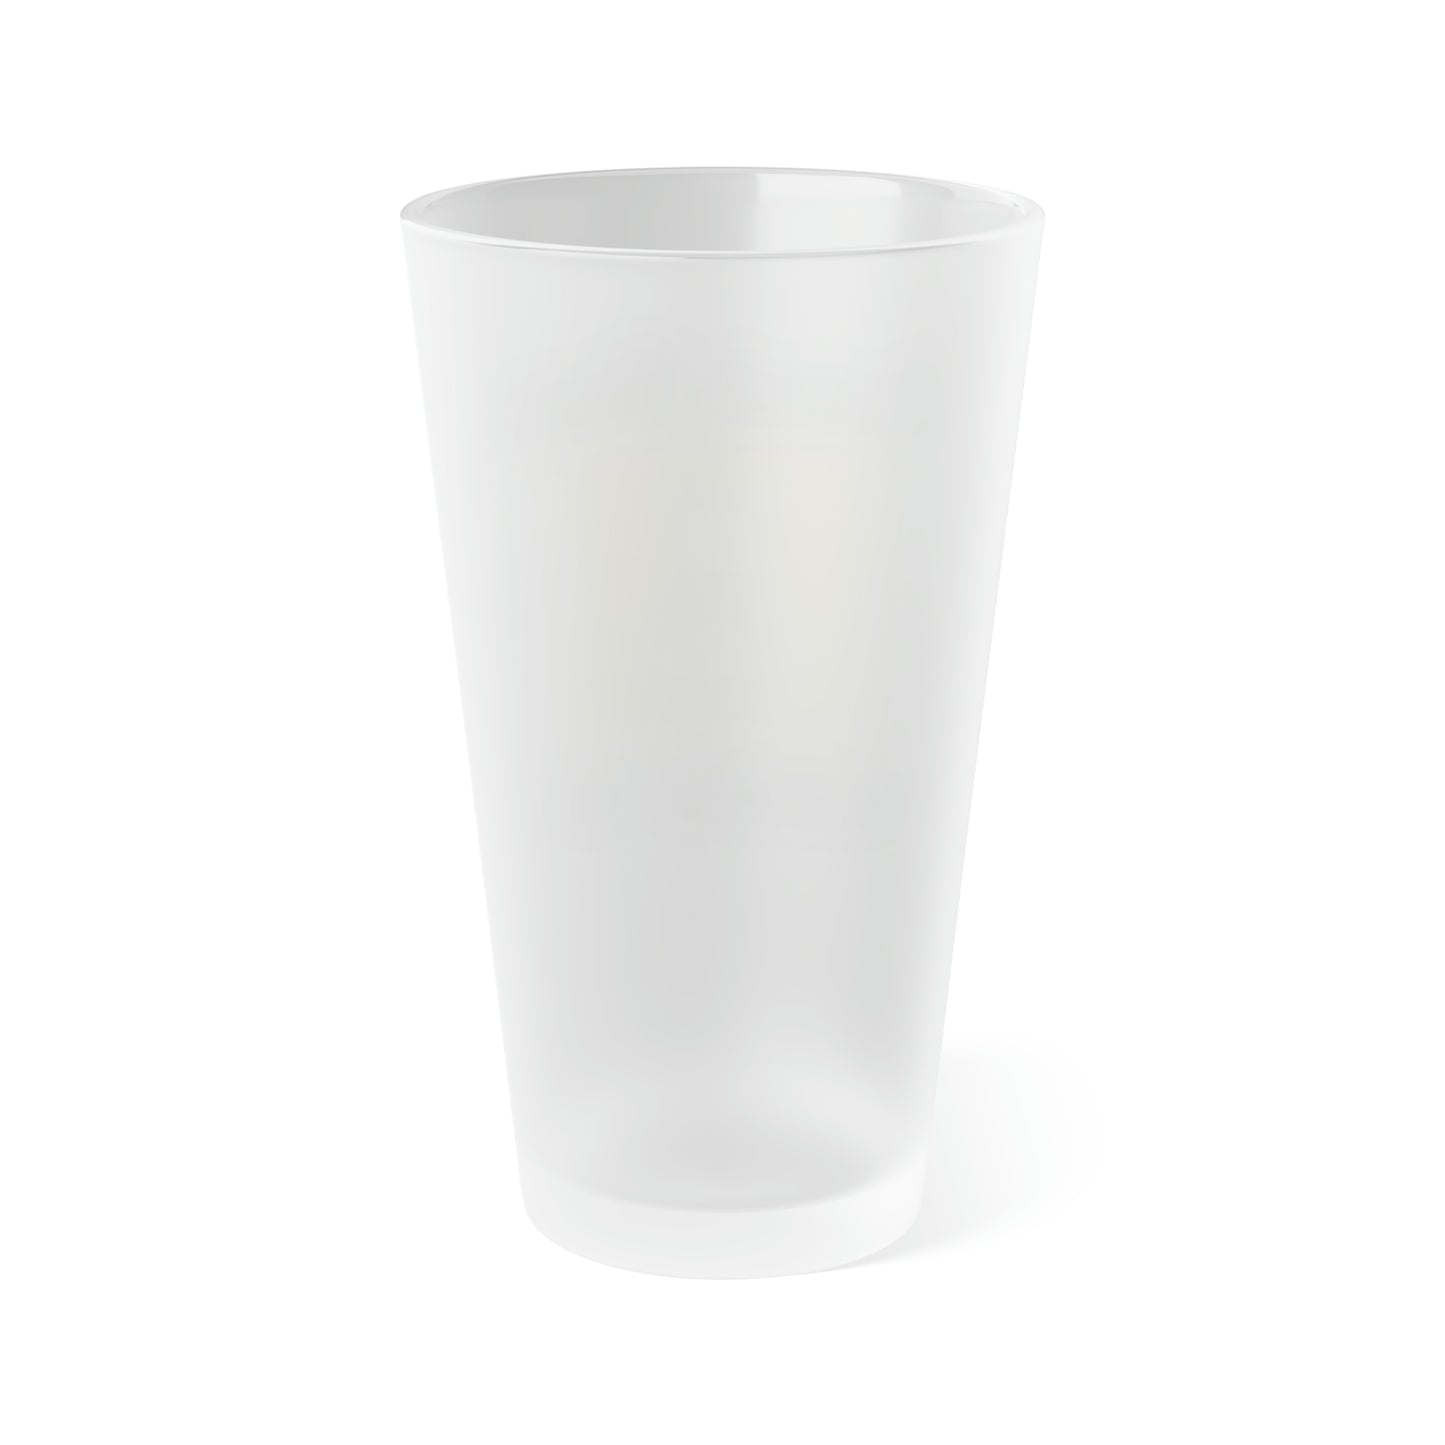 Lost Bay KOA- Frosted Pint Glass, 16oz